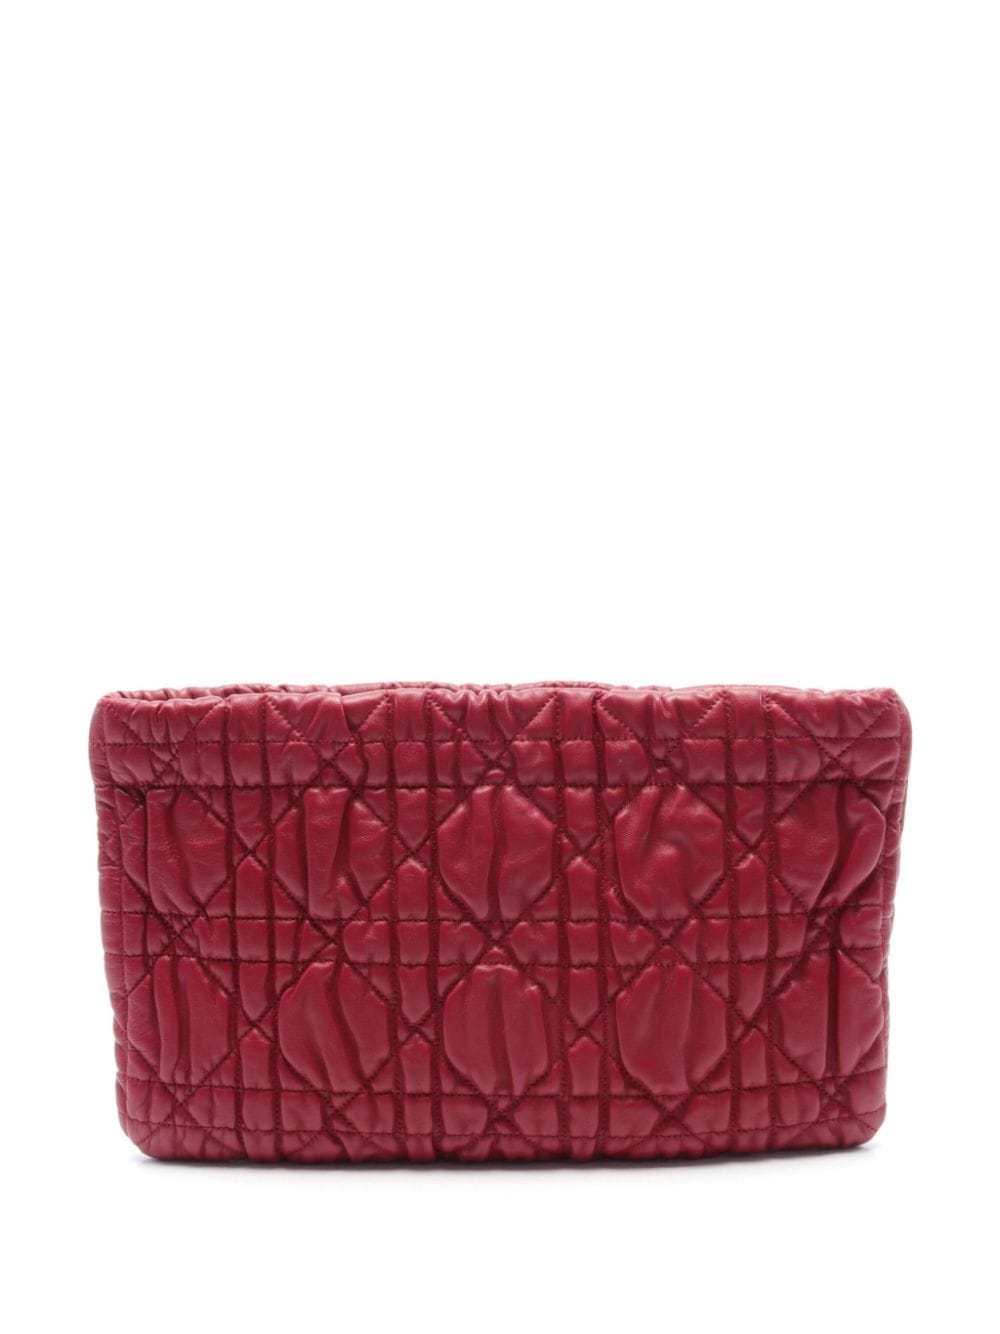 Pre-owned Dior 2010 Cannage Leather Clutch Bag In Red